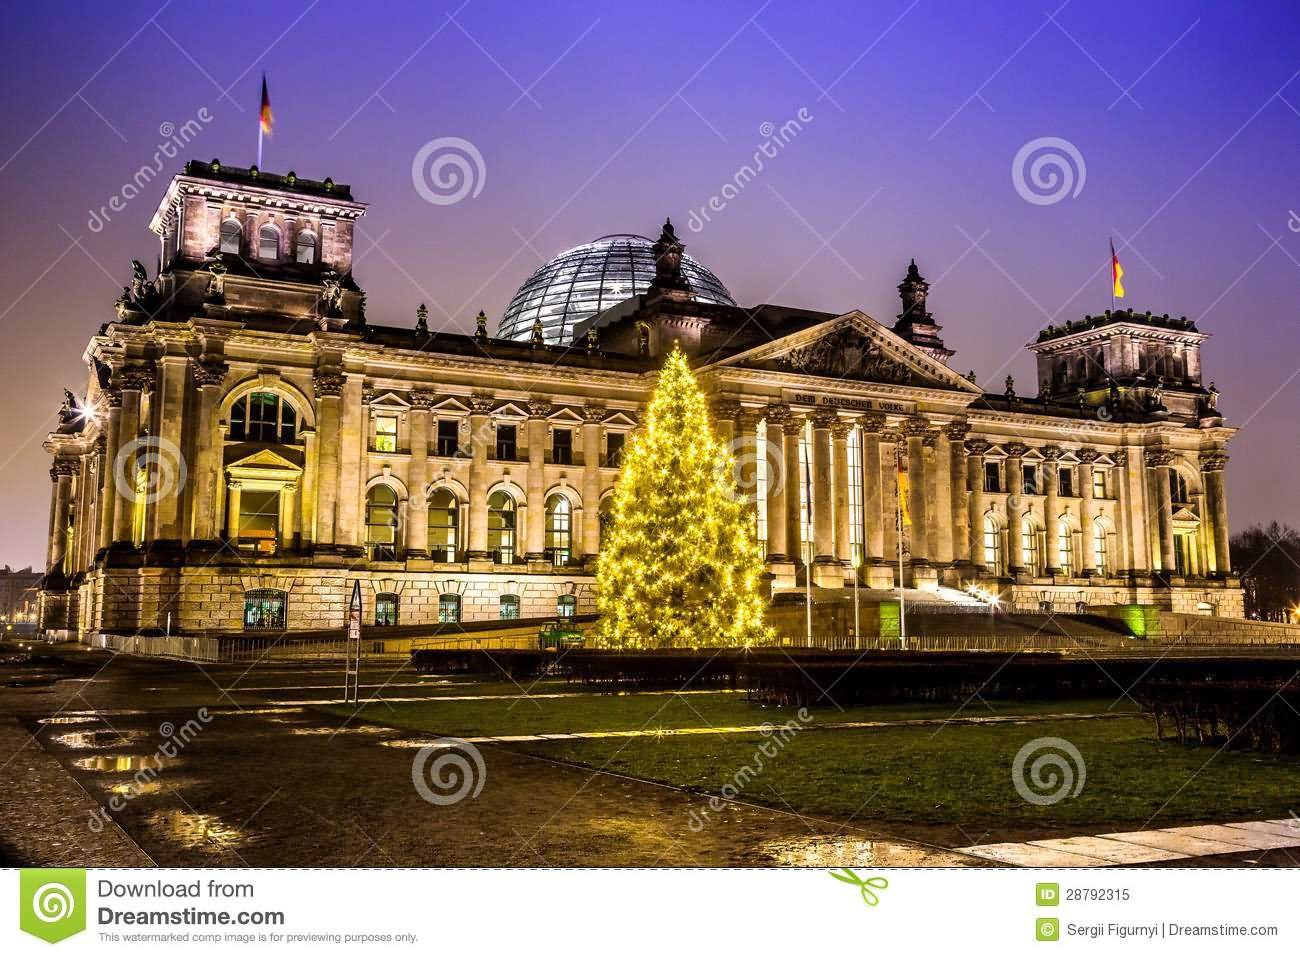 Reichstag Building In Berlin In Winter At Night  With Christmas Tree